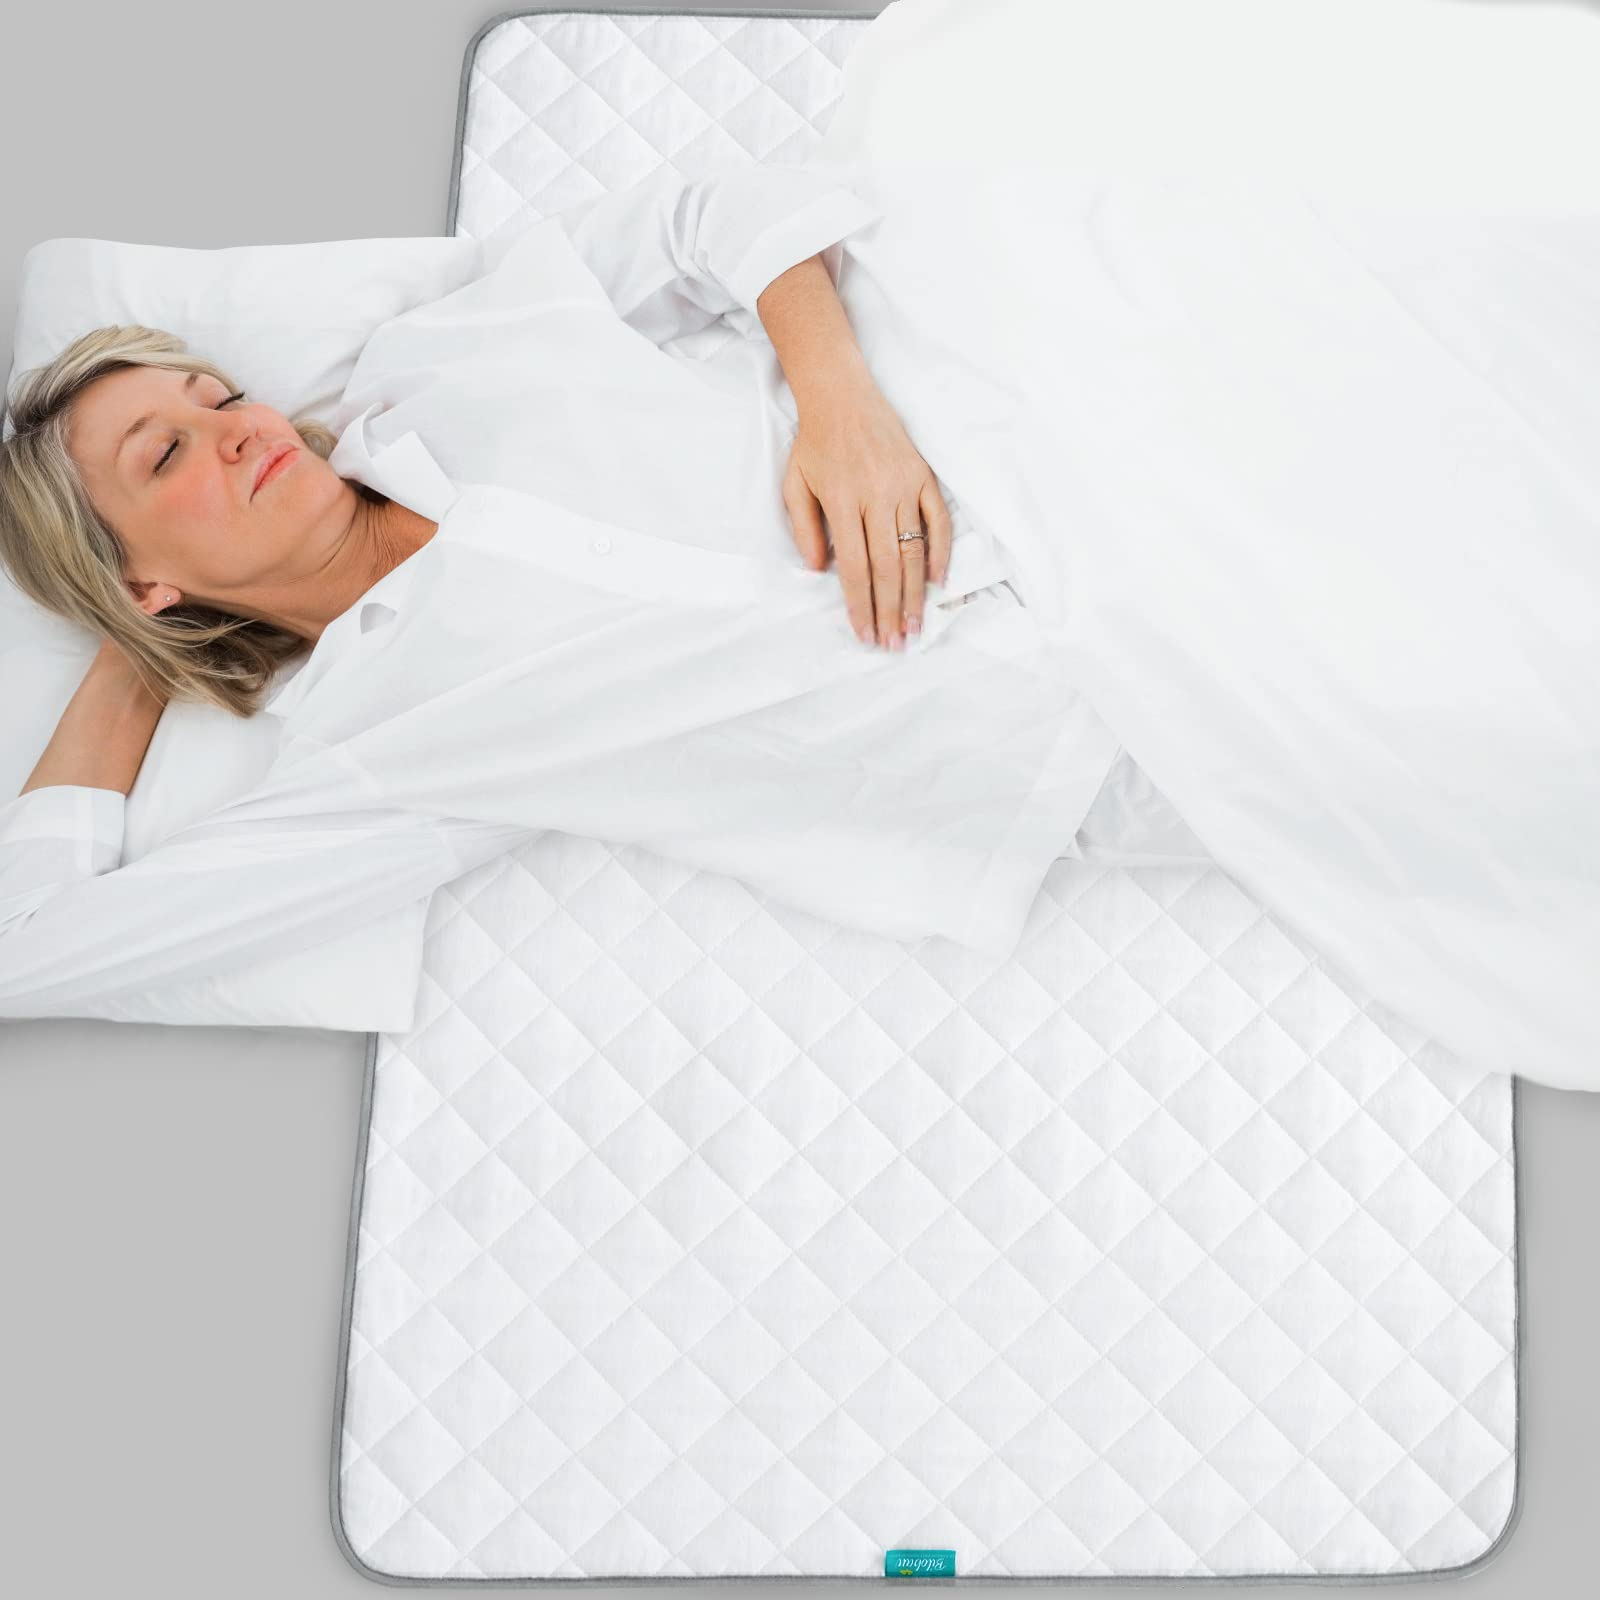 Large Mattress Protector - Bed Pee Pad for Kids, Incontinence - White 36x58